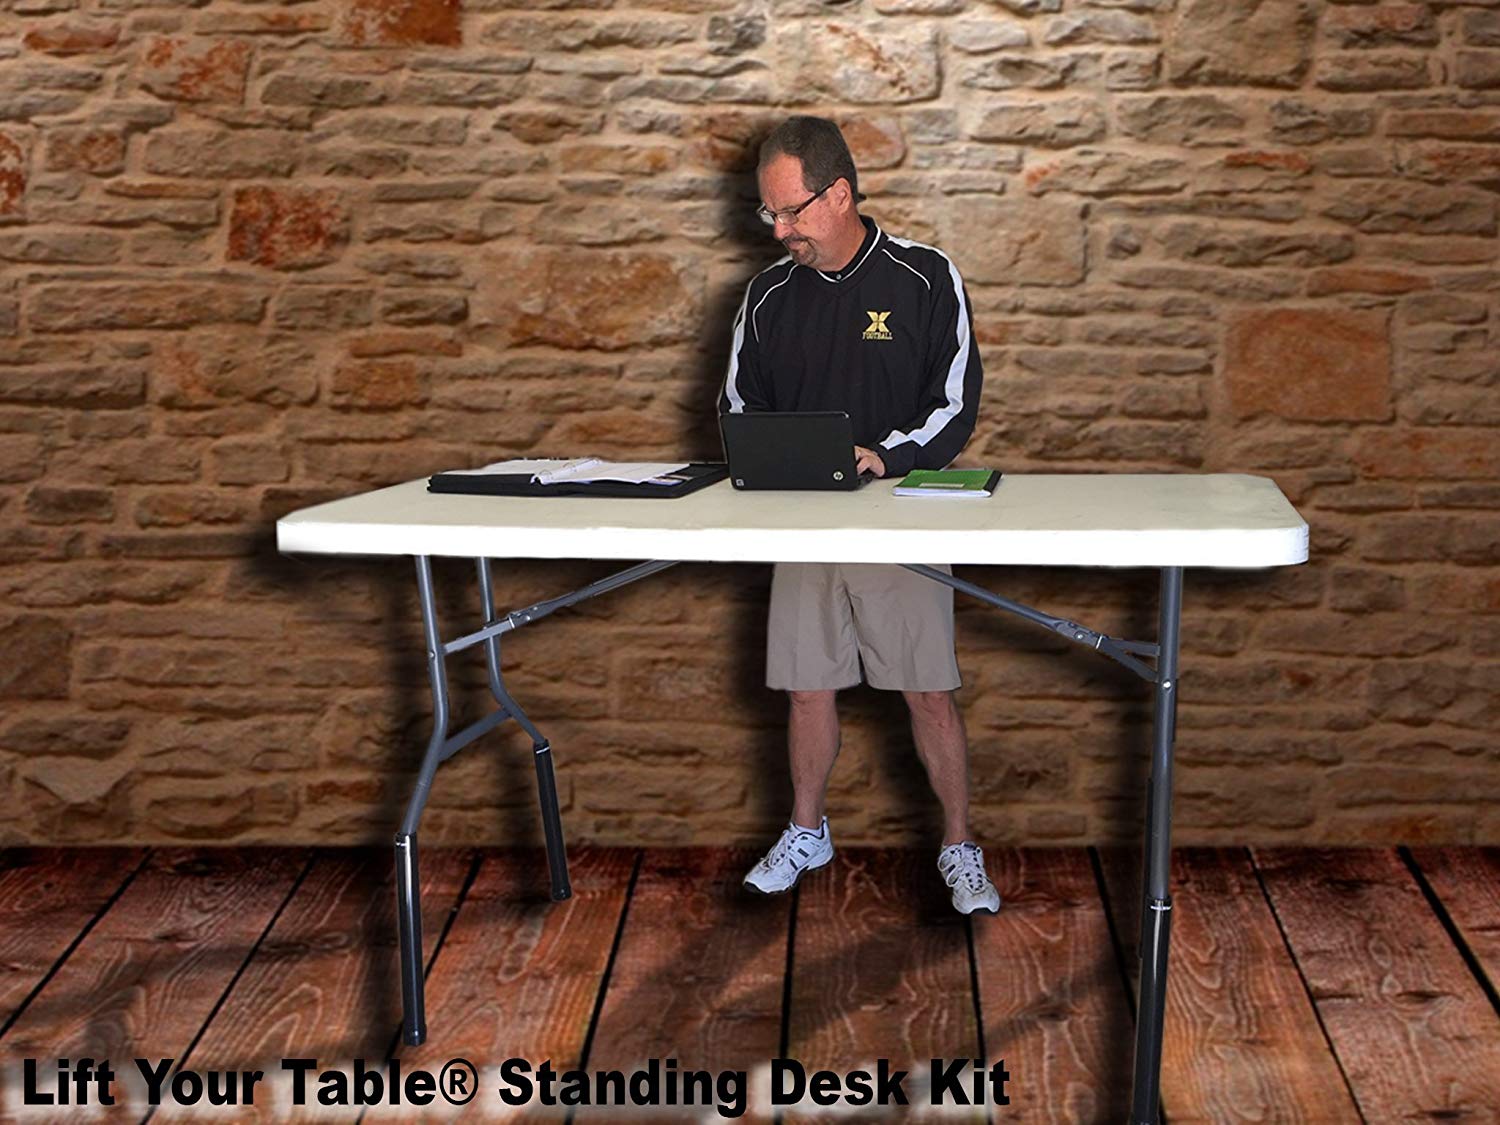 Lift Your Table TM Standing Desk for Back Pain Relief